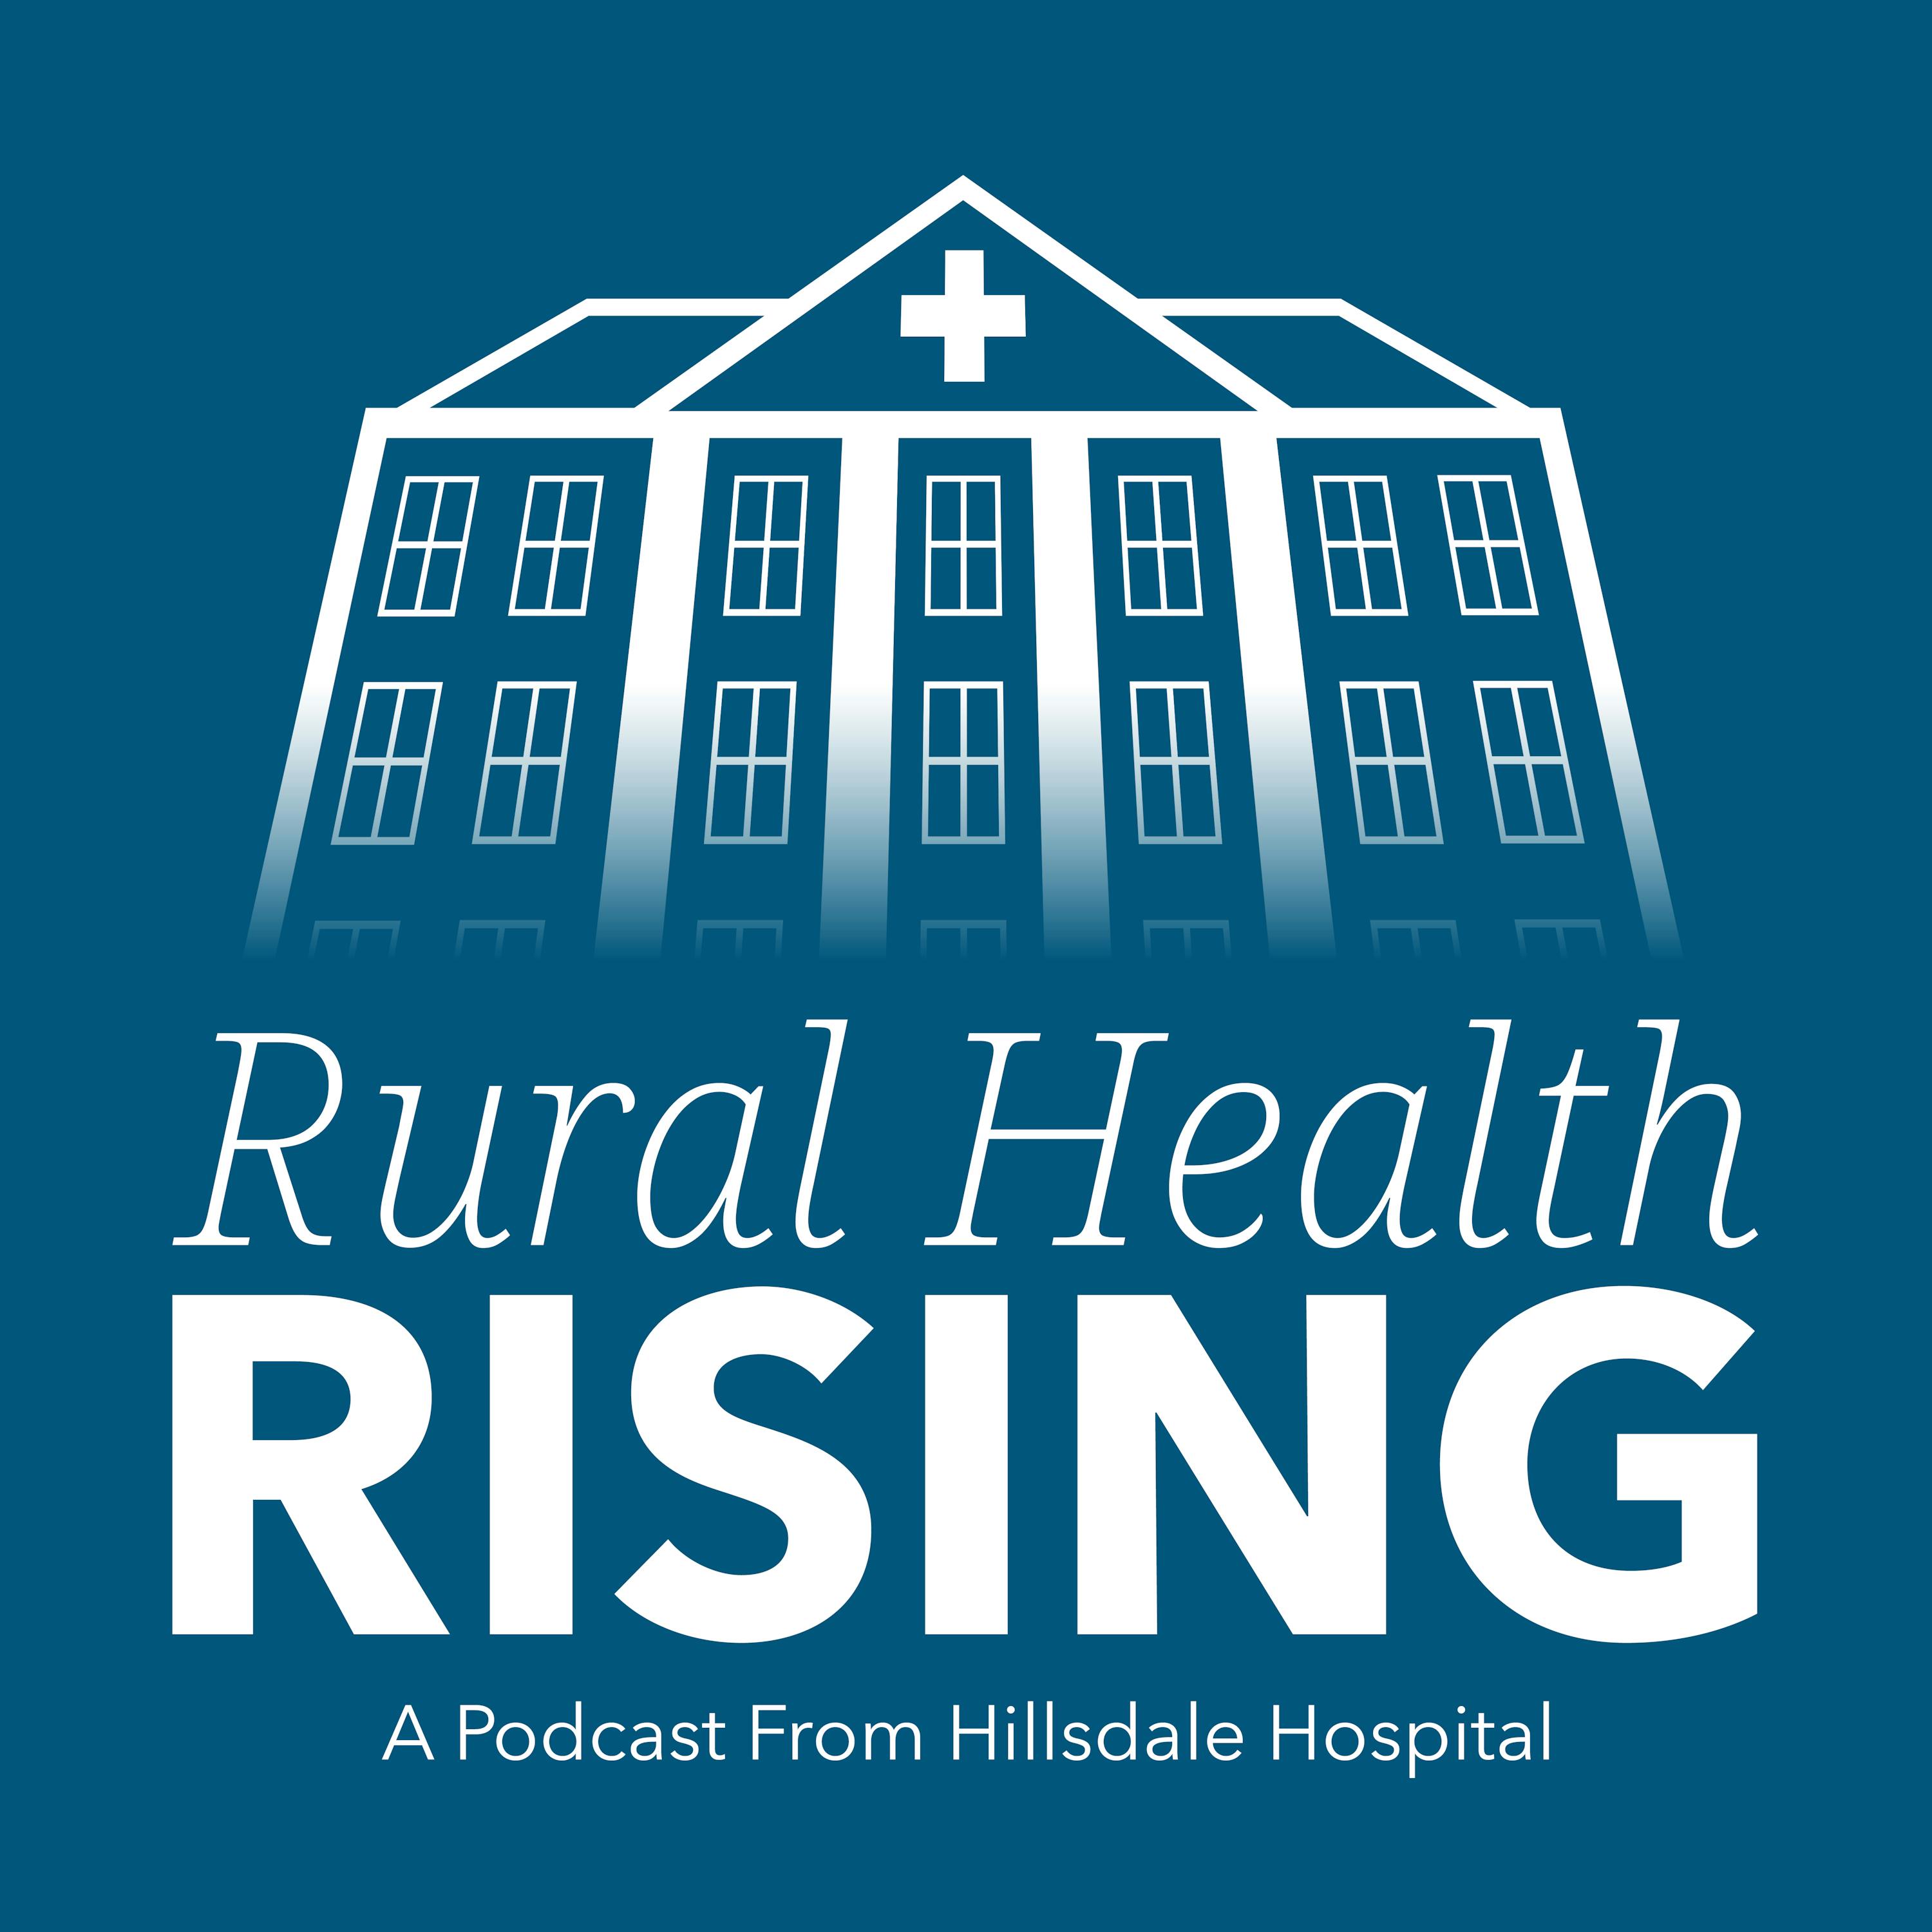 Episode 59: Health Policy at the State Level